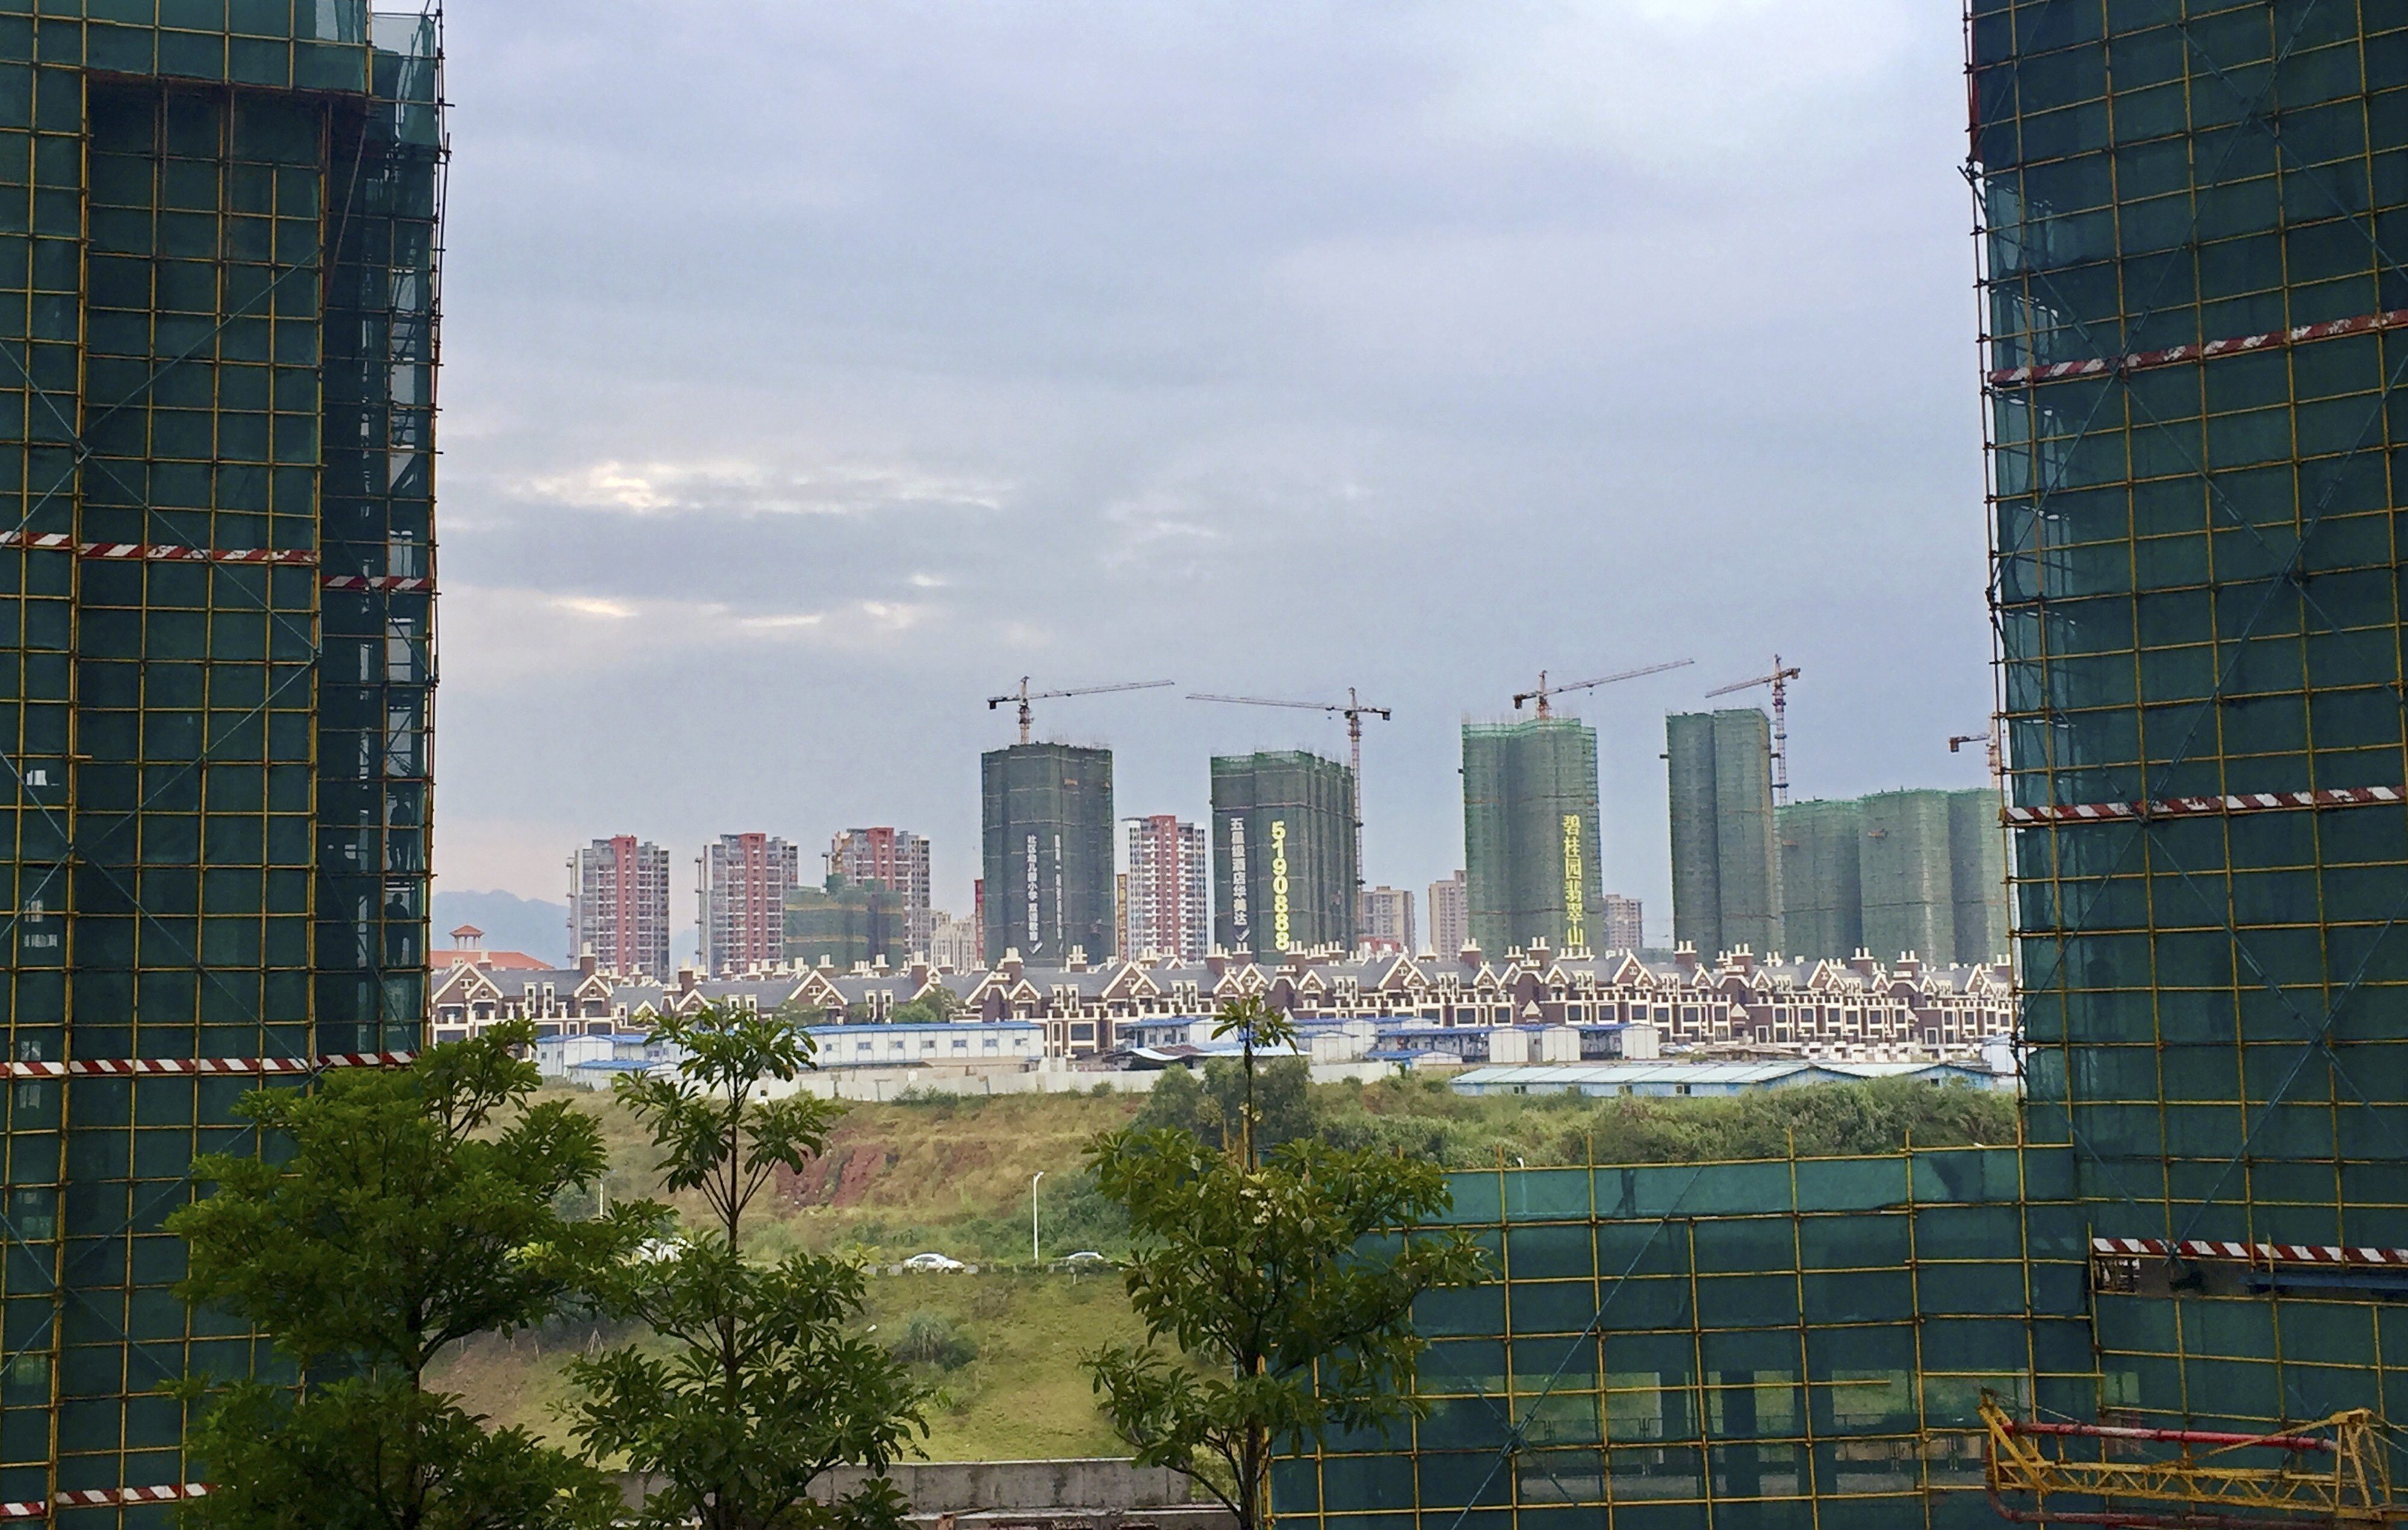 Huizhou’s office market has ‘turned out to be relatively stable’, according to Savills. Photo: SCMP